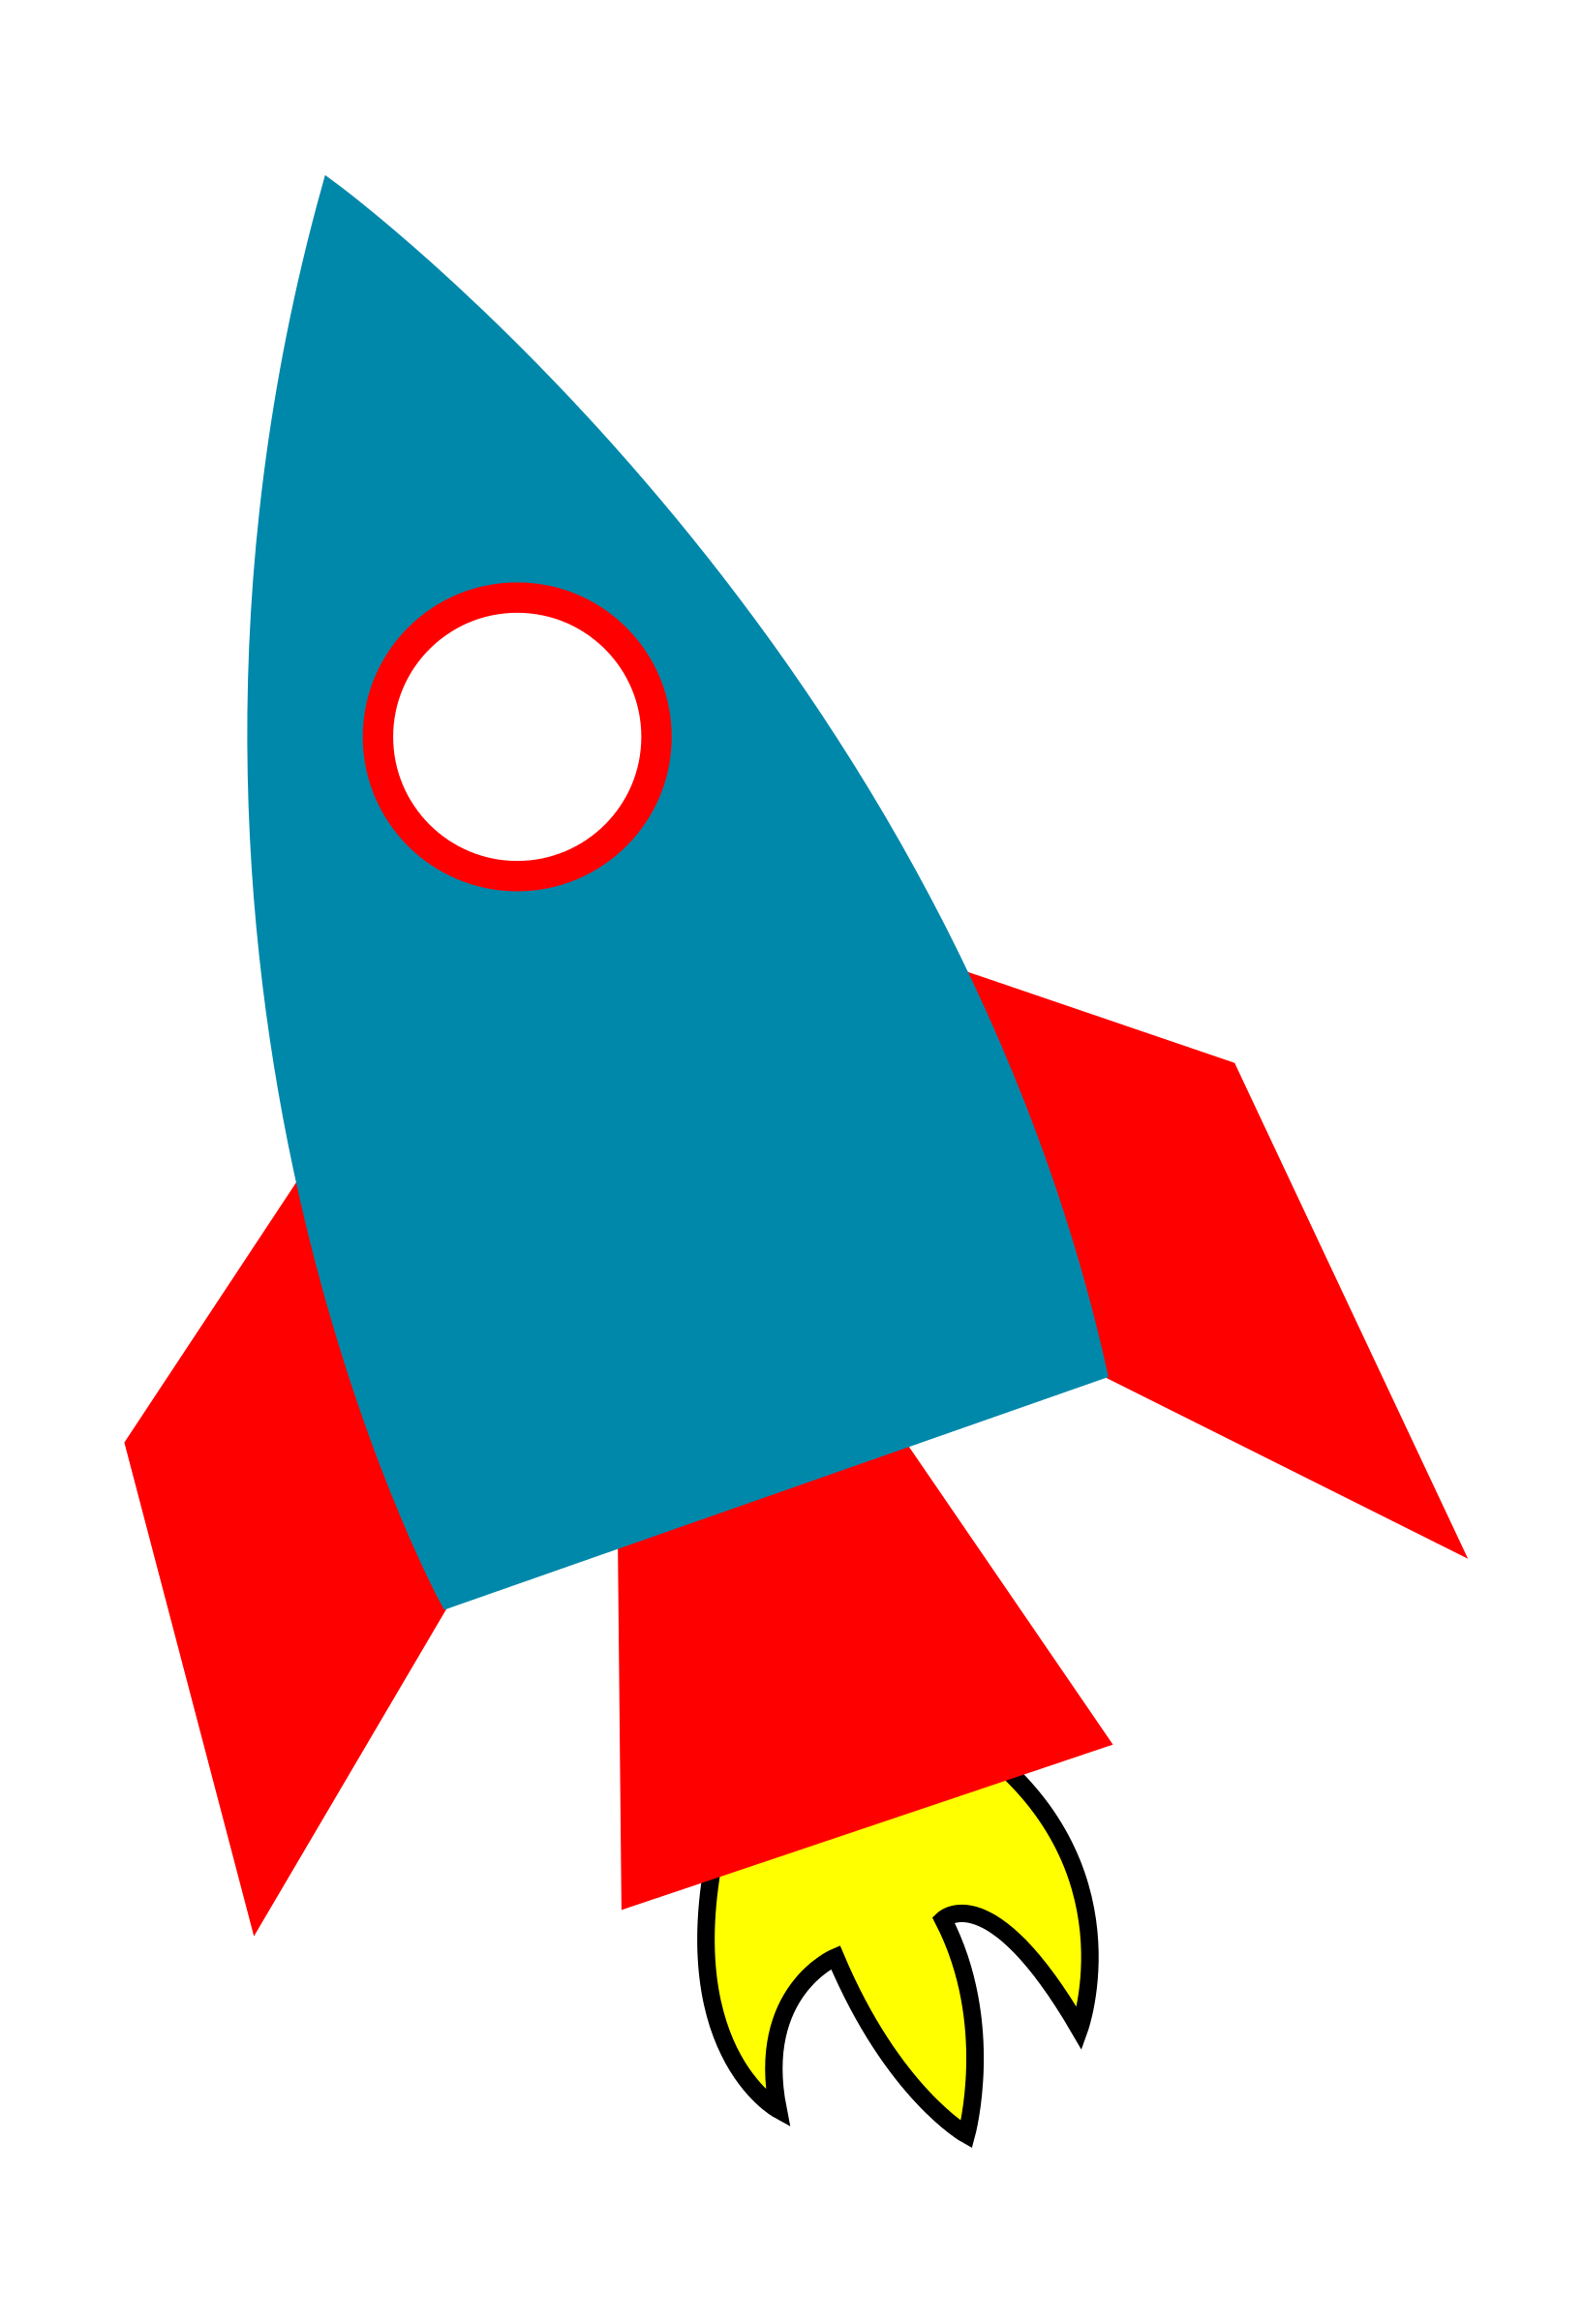 space clipart animations - photo #35